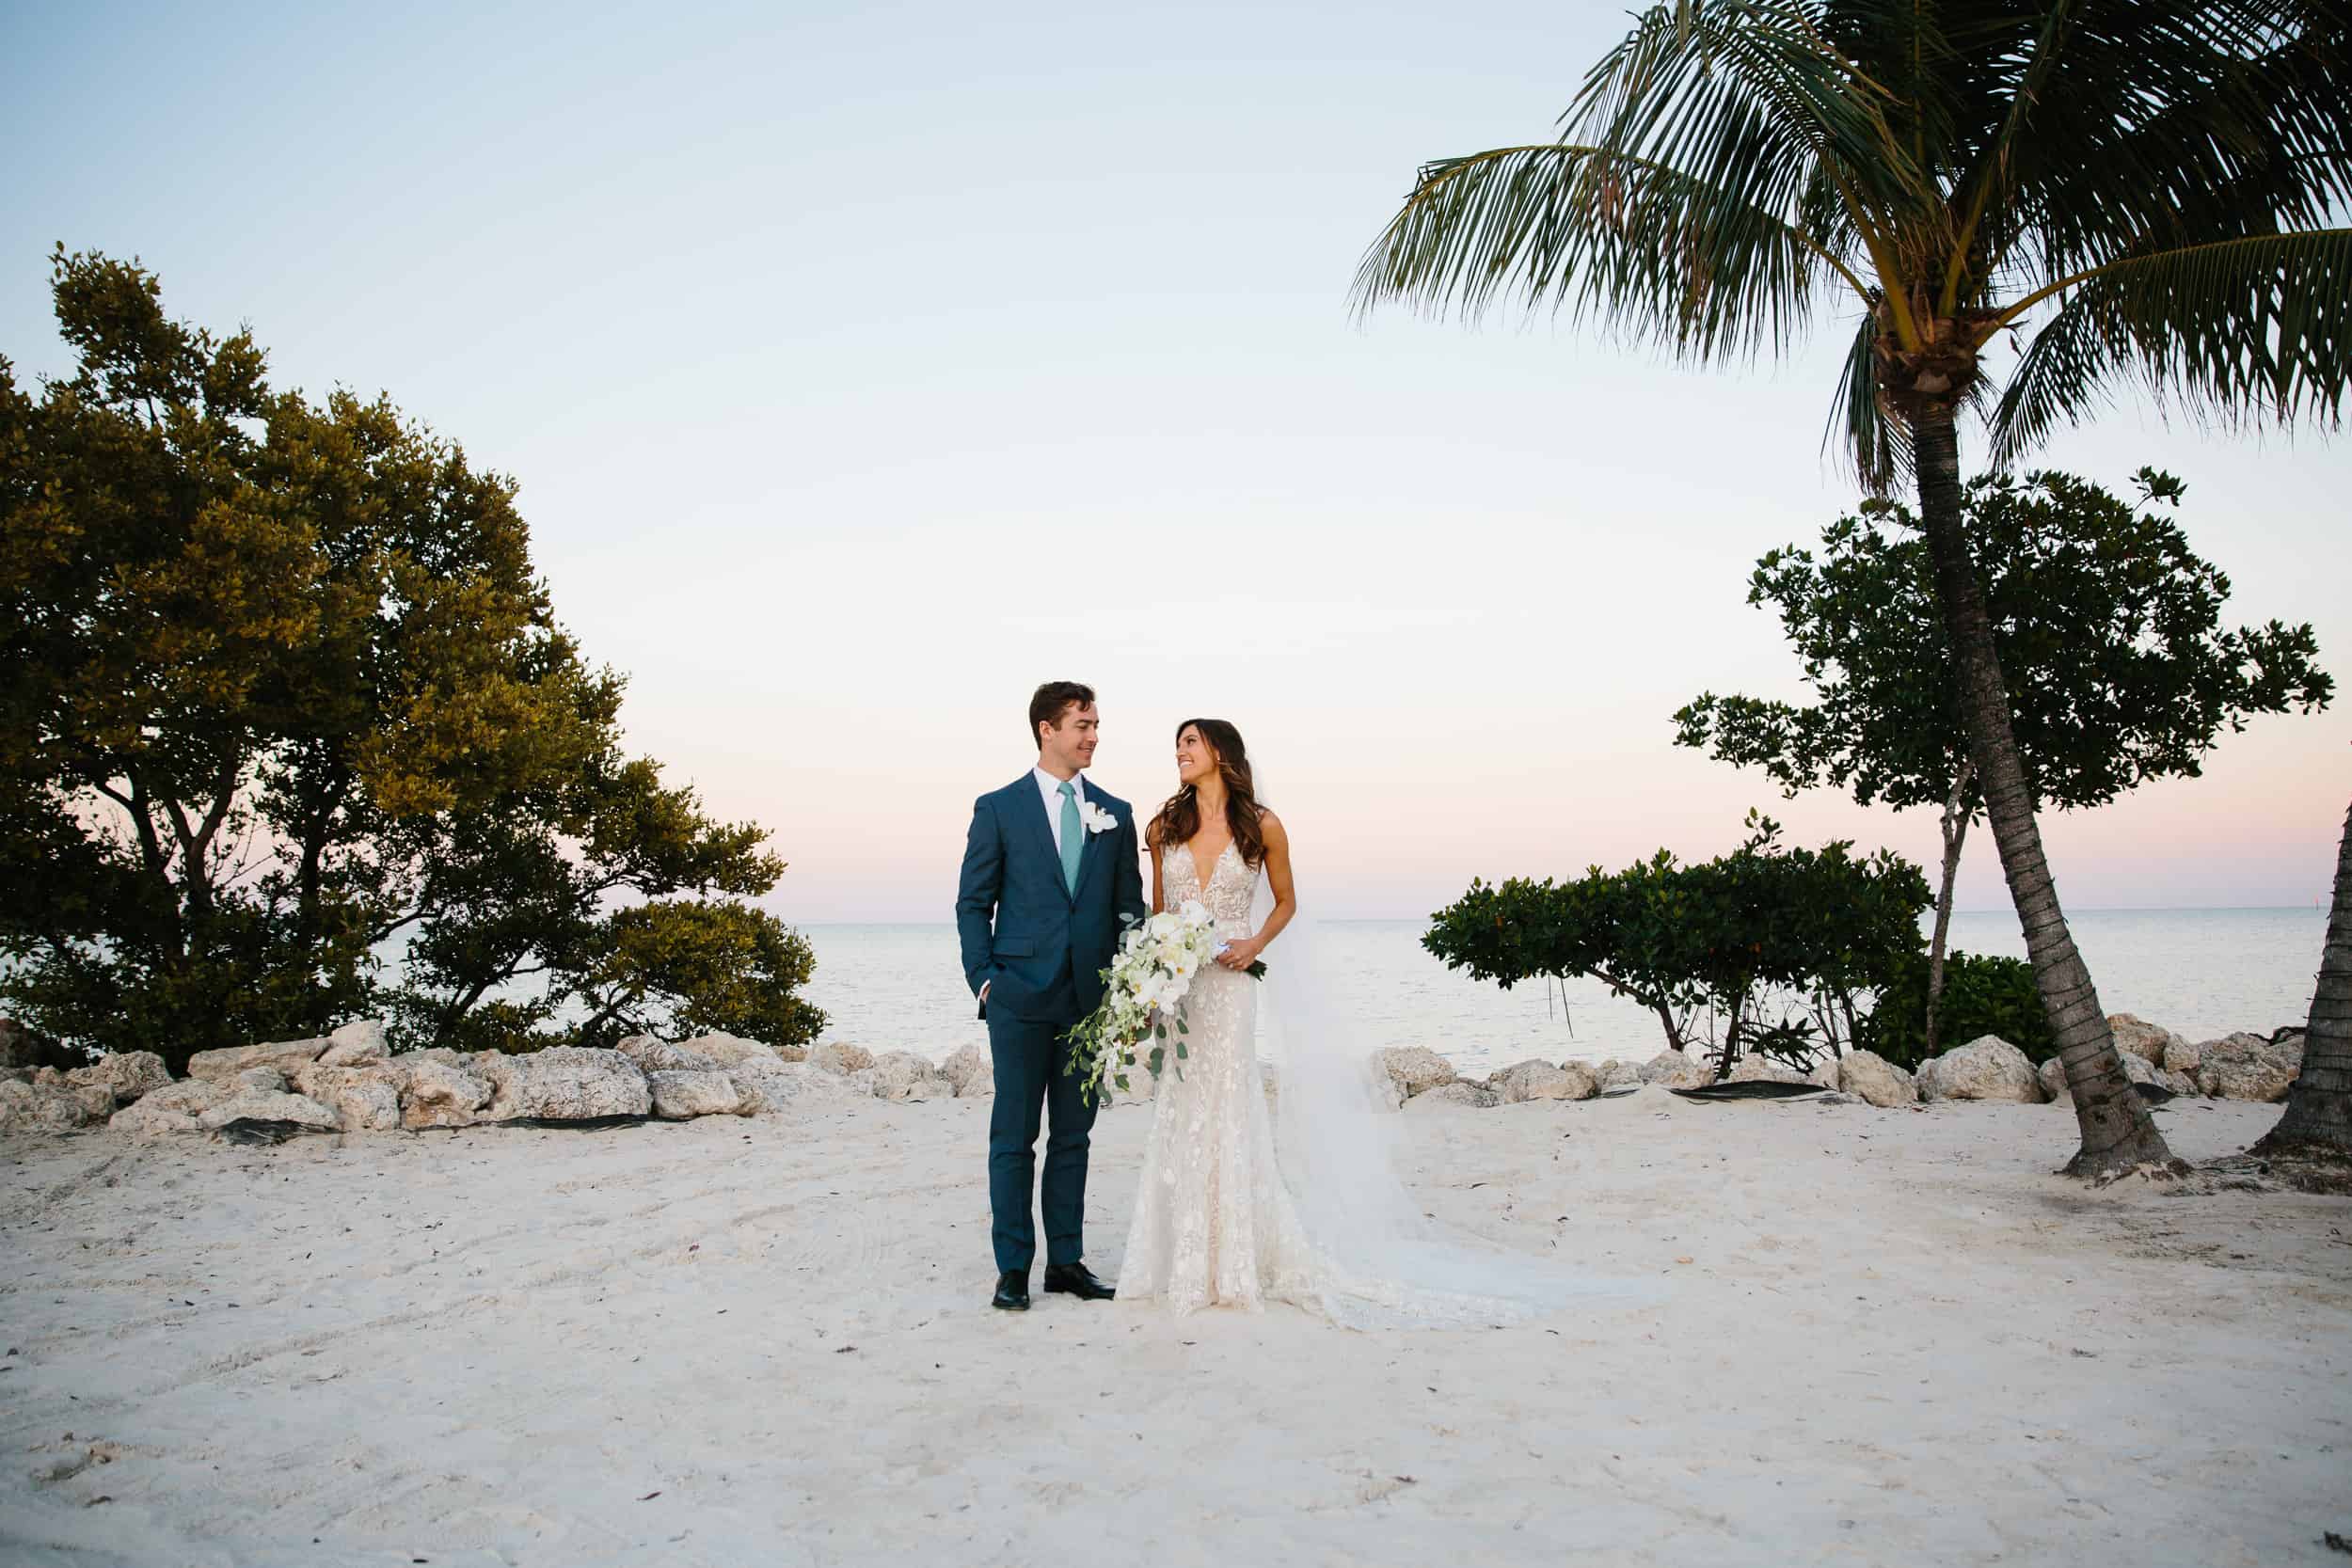 beautiful sunset ceremony at the Ocean Reef Club in Key Largo